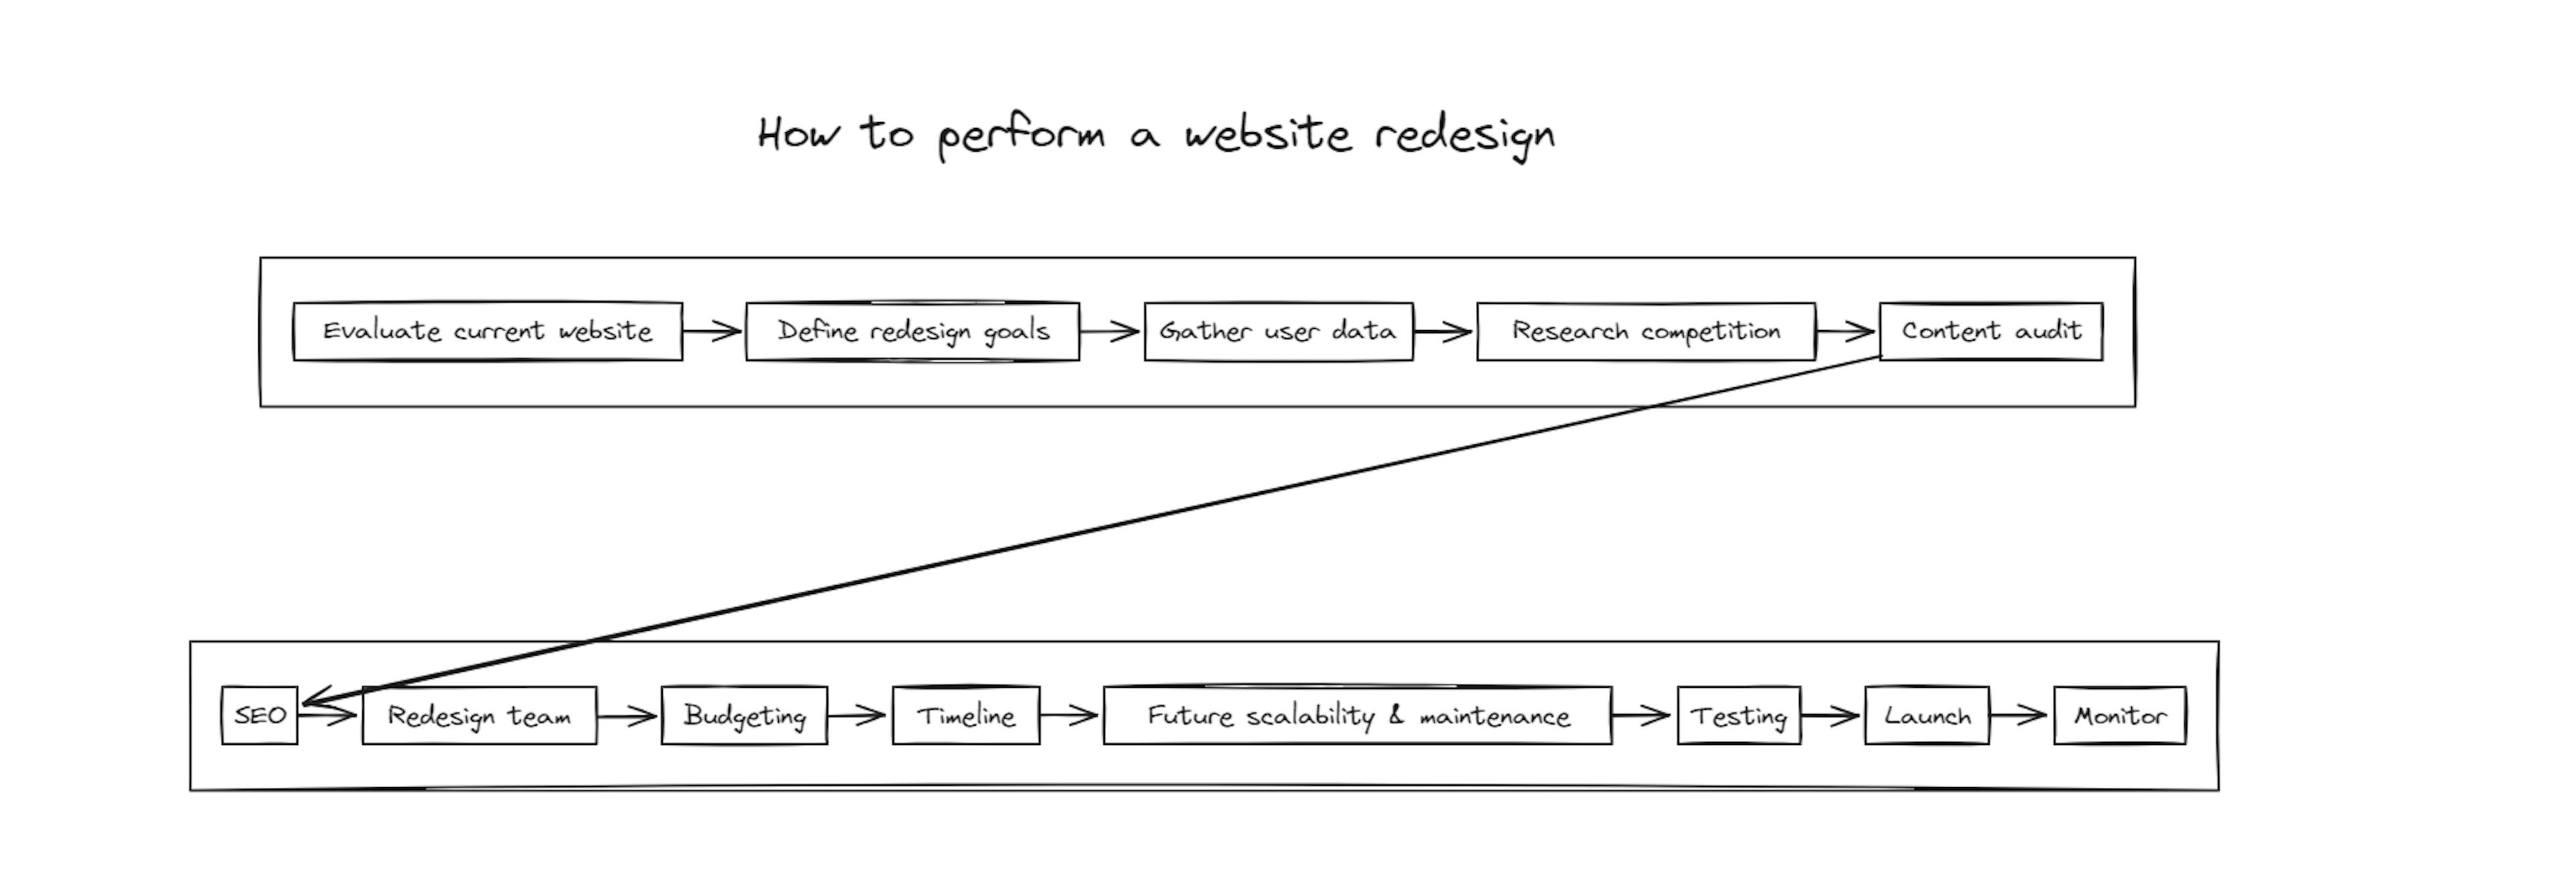 Diagram of steps to perform a website redesign.